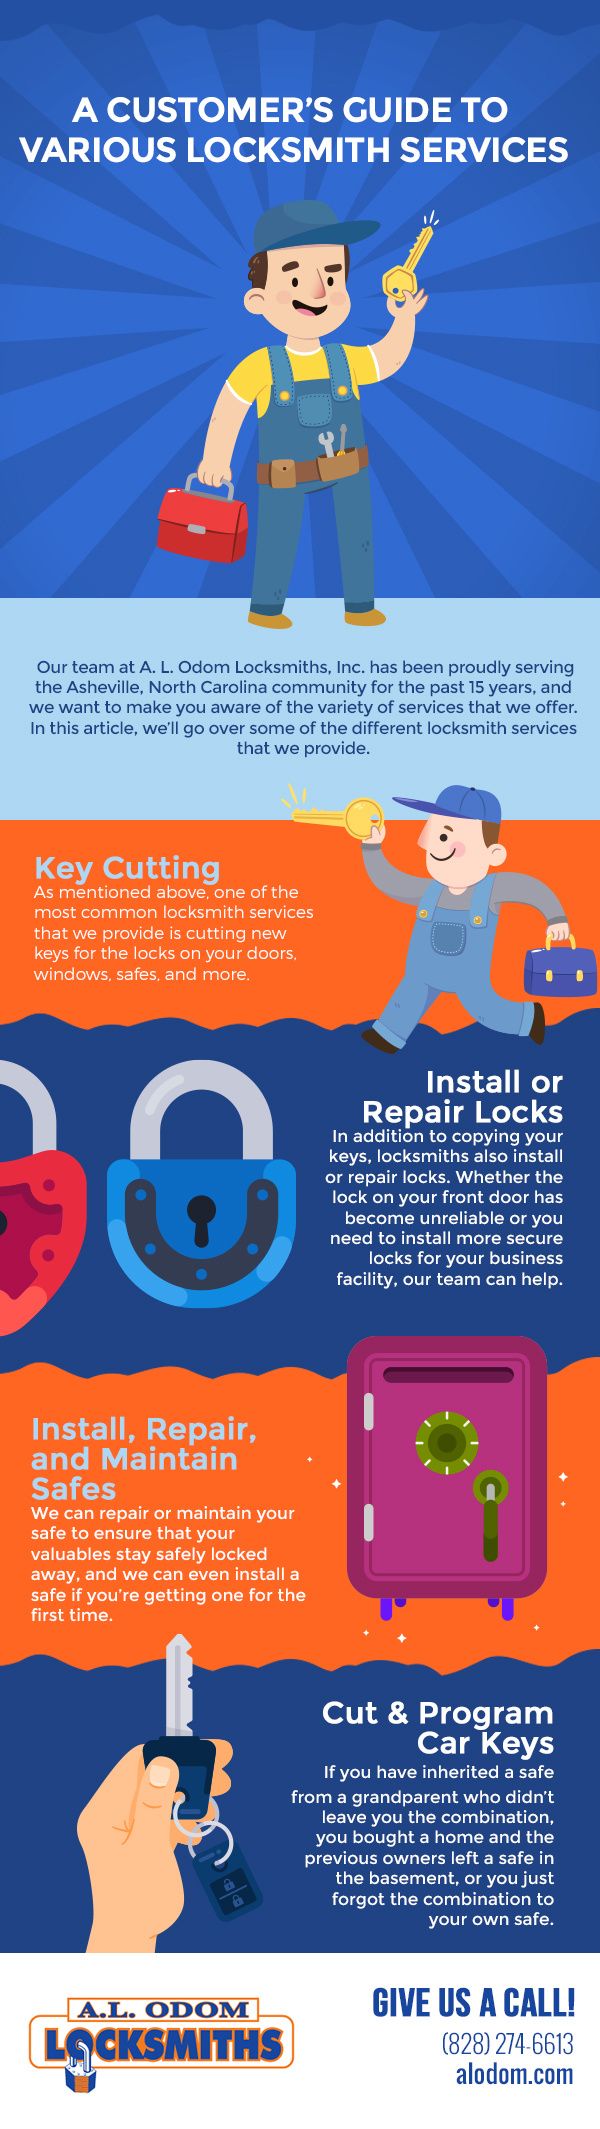 A Customer’s Guide to Various Locksmith Services